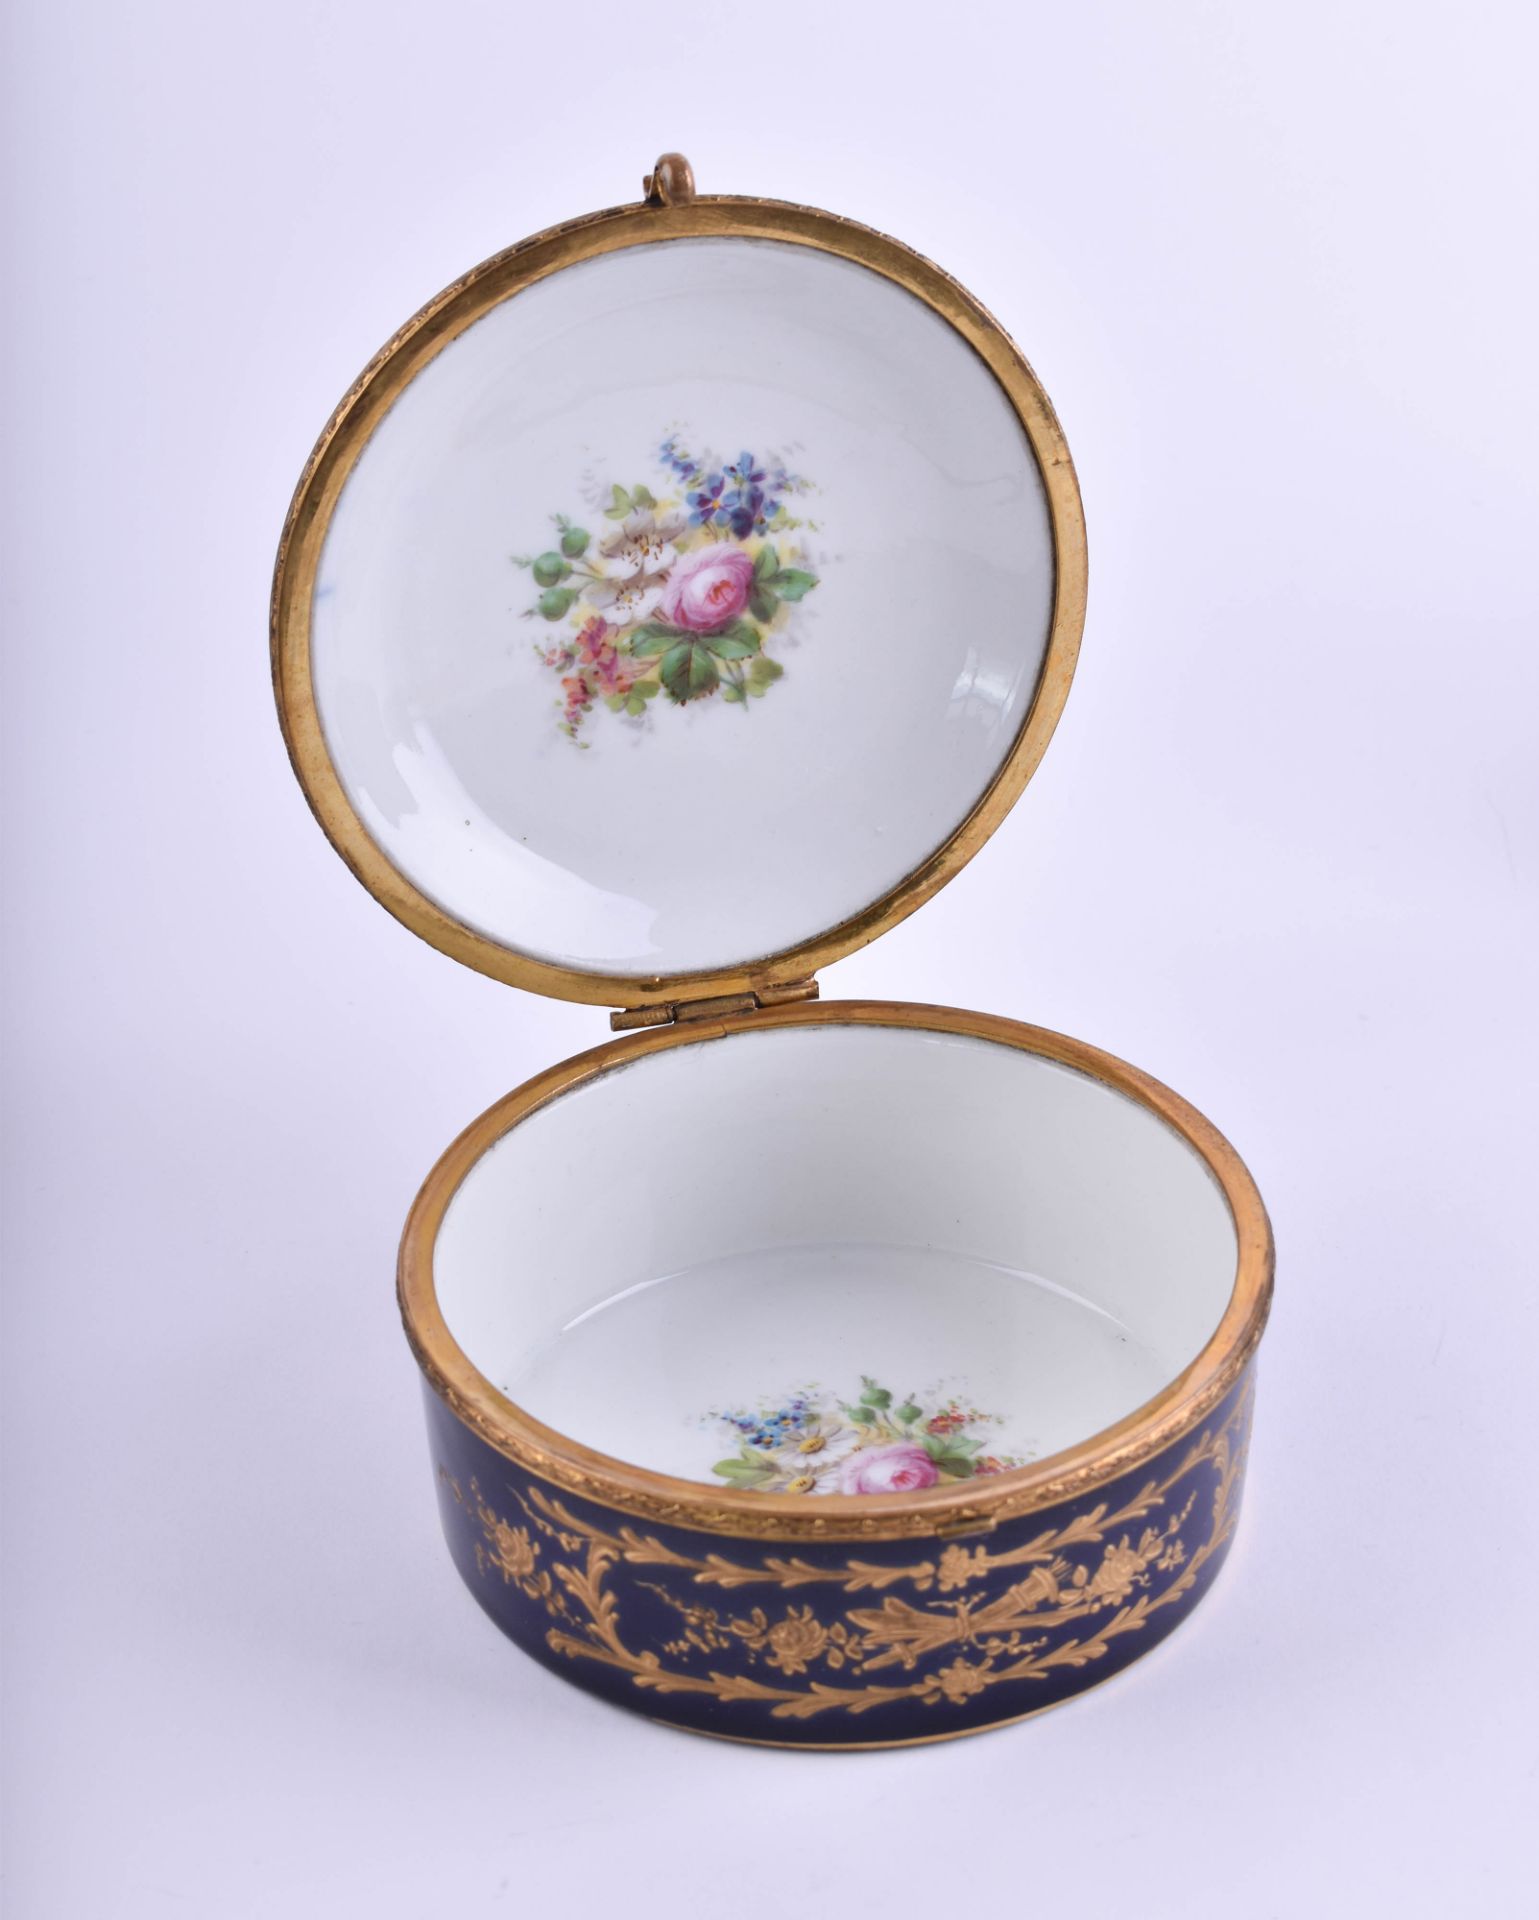  Porcelain cover box Sevres - Image 6 of 7